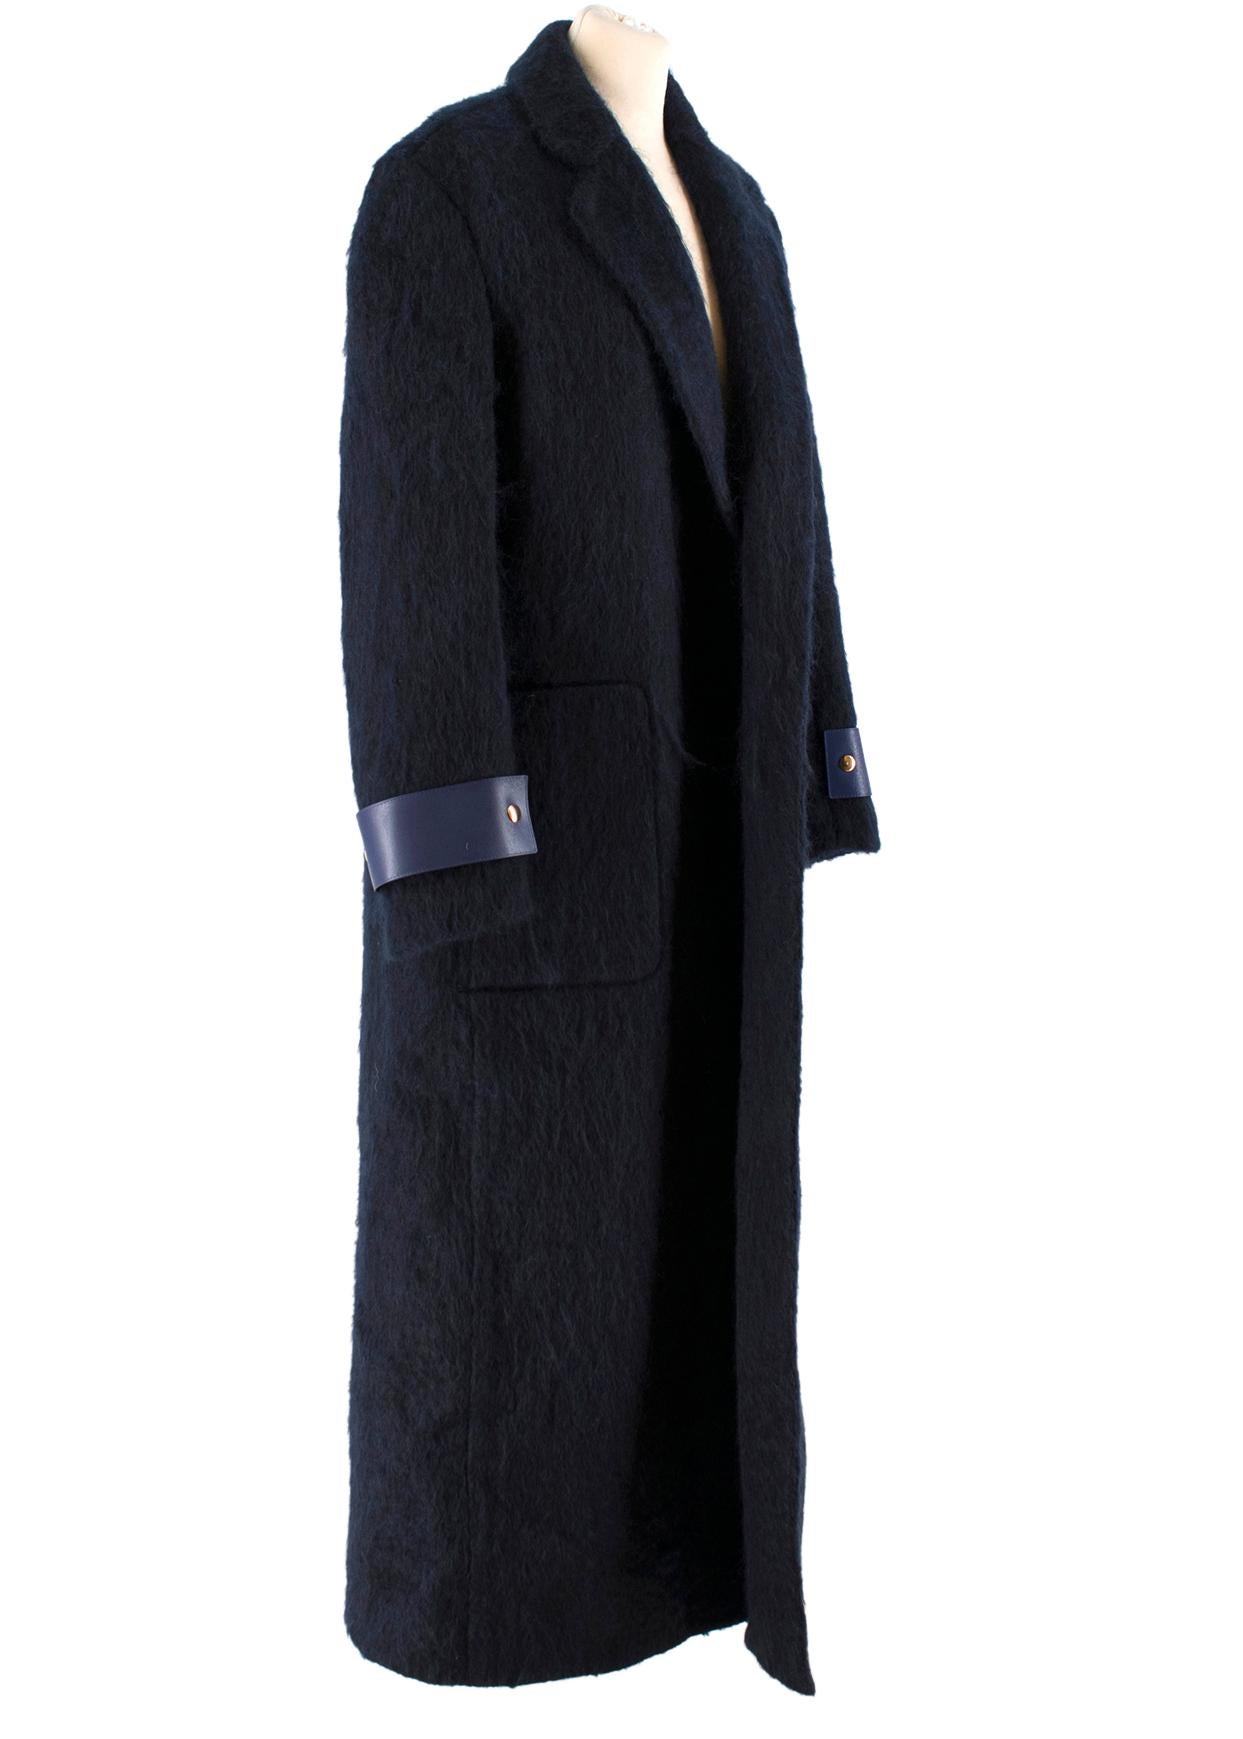 Agnona Navy Mohair Blend Coat

-Current season 

-Dark blue mohair coat
-Notched lapels
-Two front pockets
-Leather detailing at the belt and cuffs
-Slit at the back hemline
-Heavyweight mohair blend coat

Please note, these items are pre-owned and